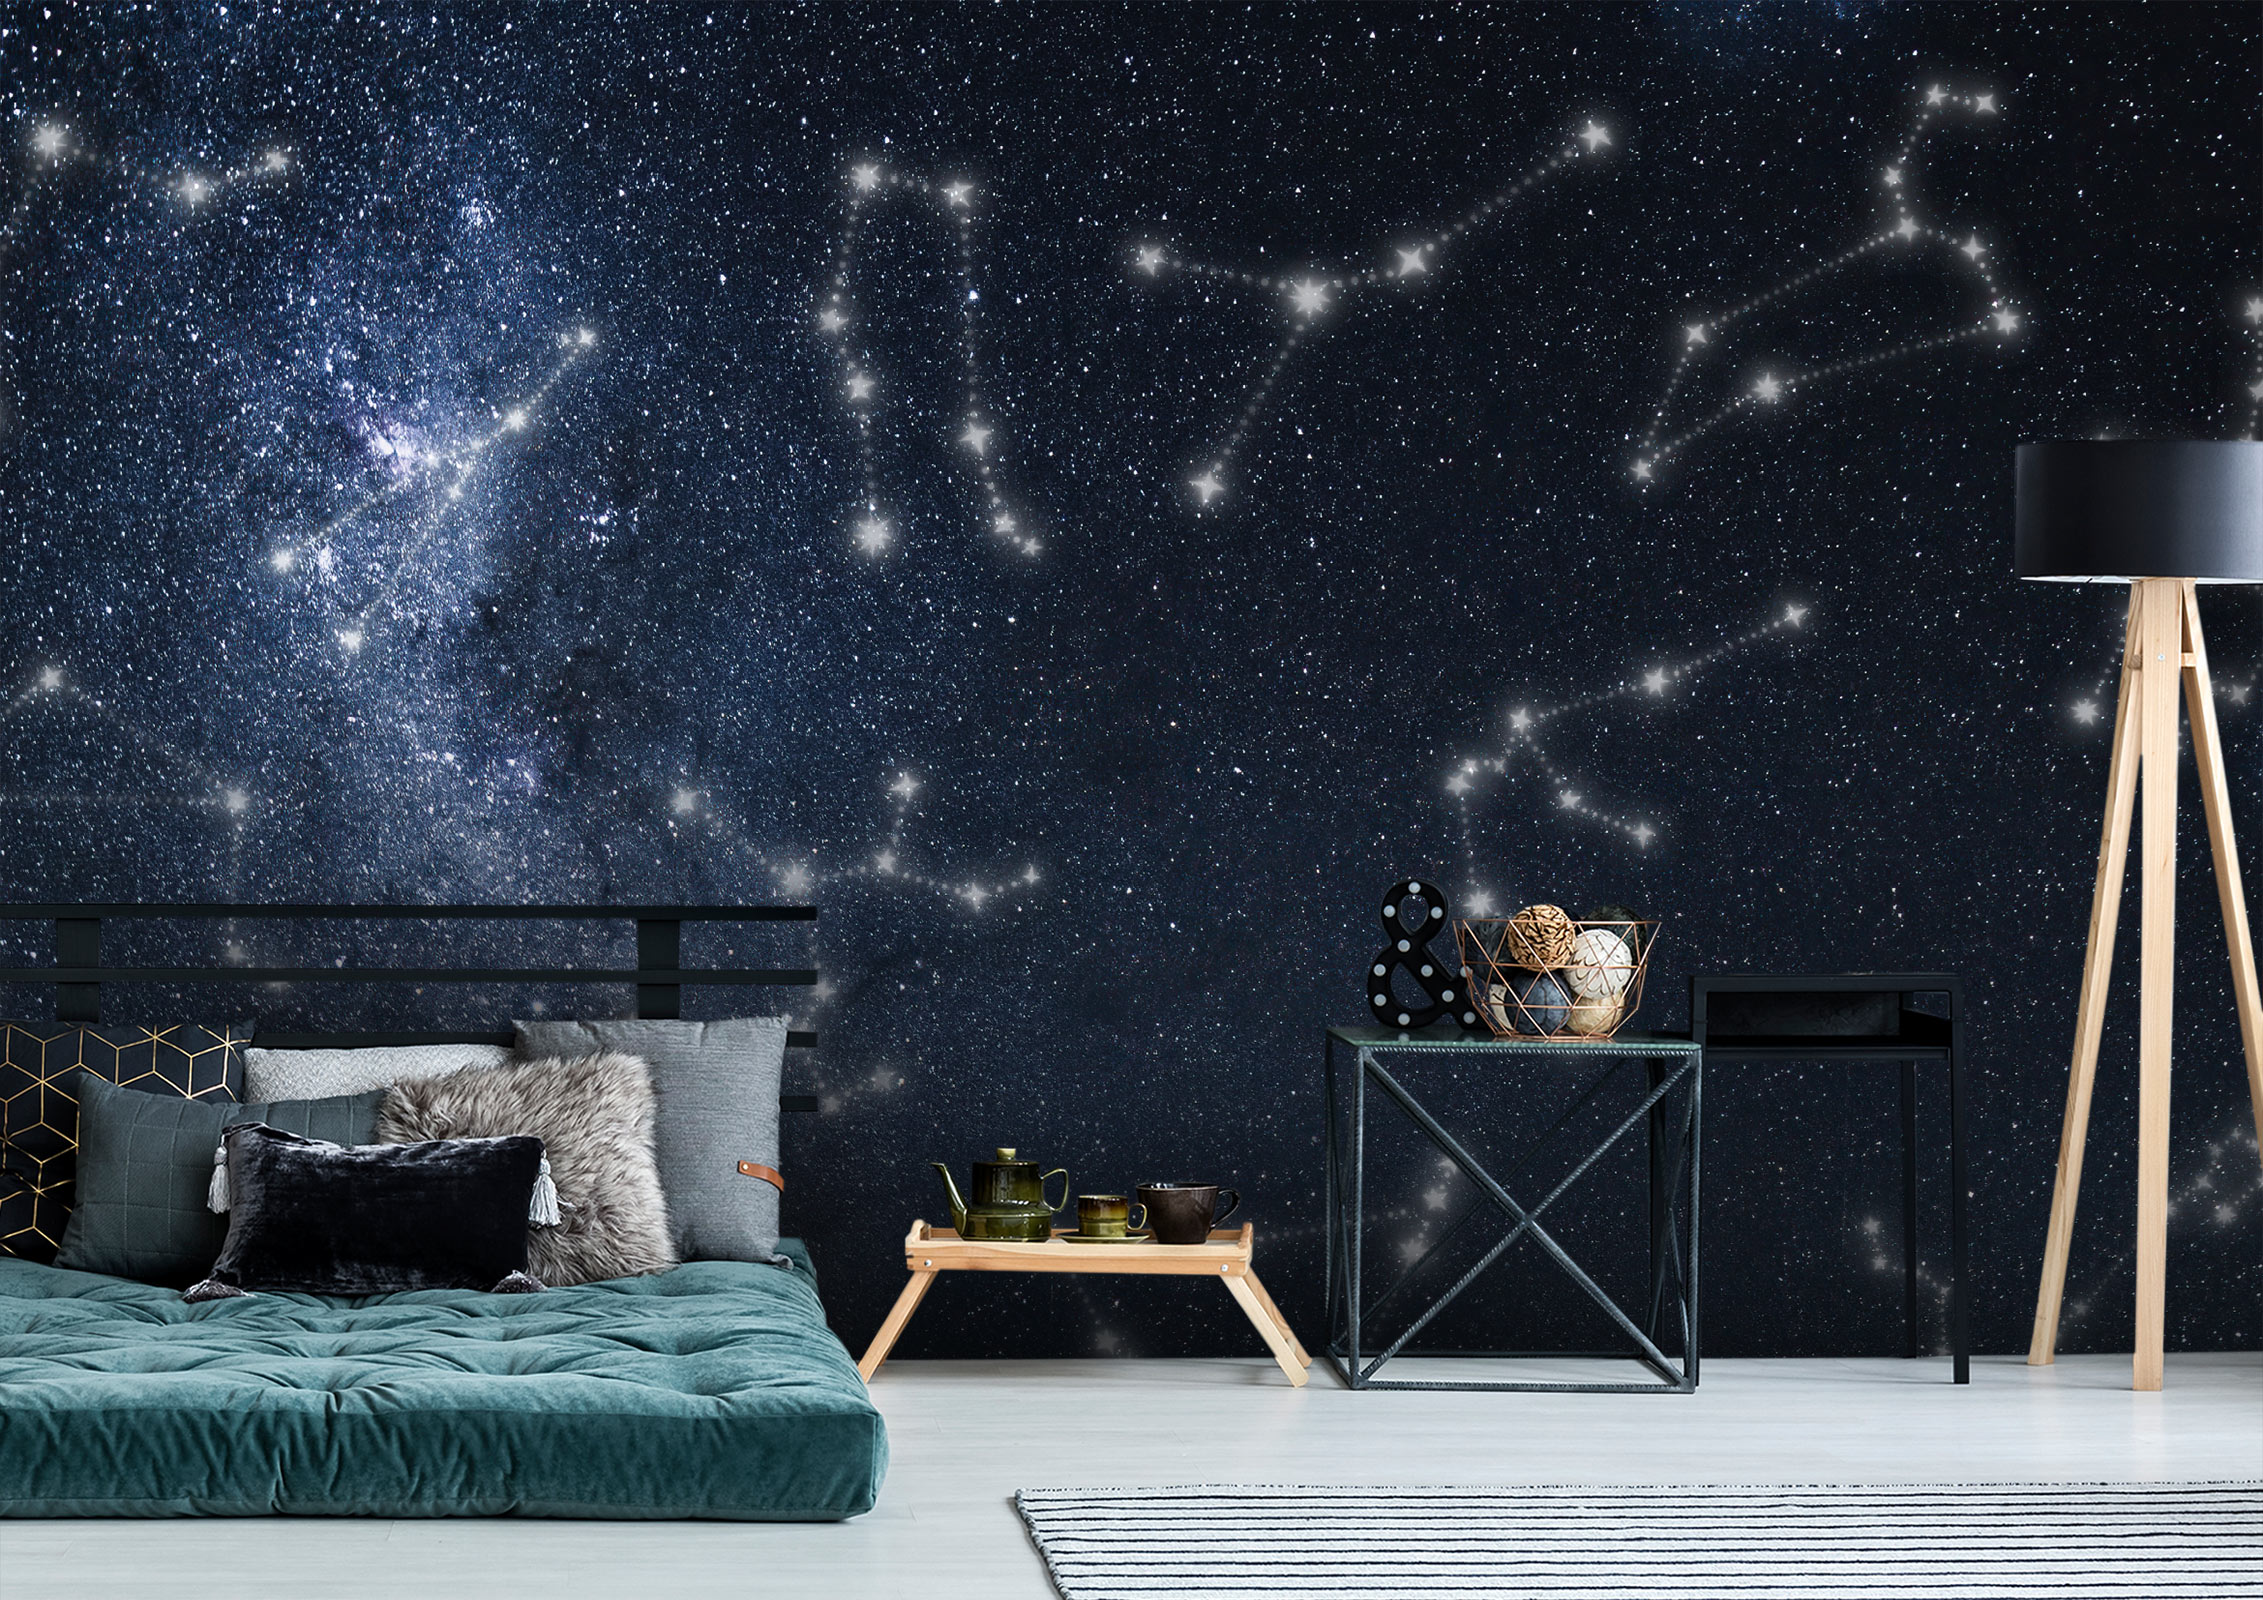 Zodiac Signs in the Starry Sky